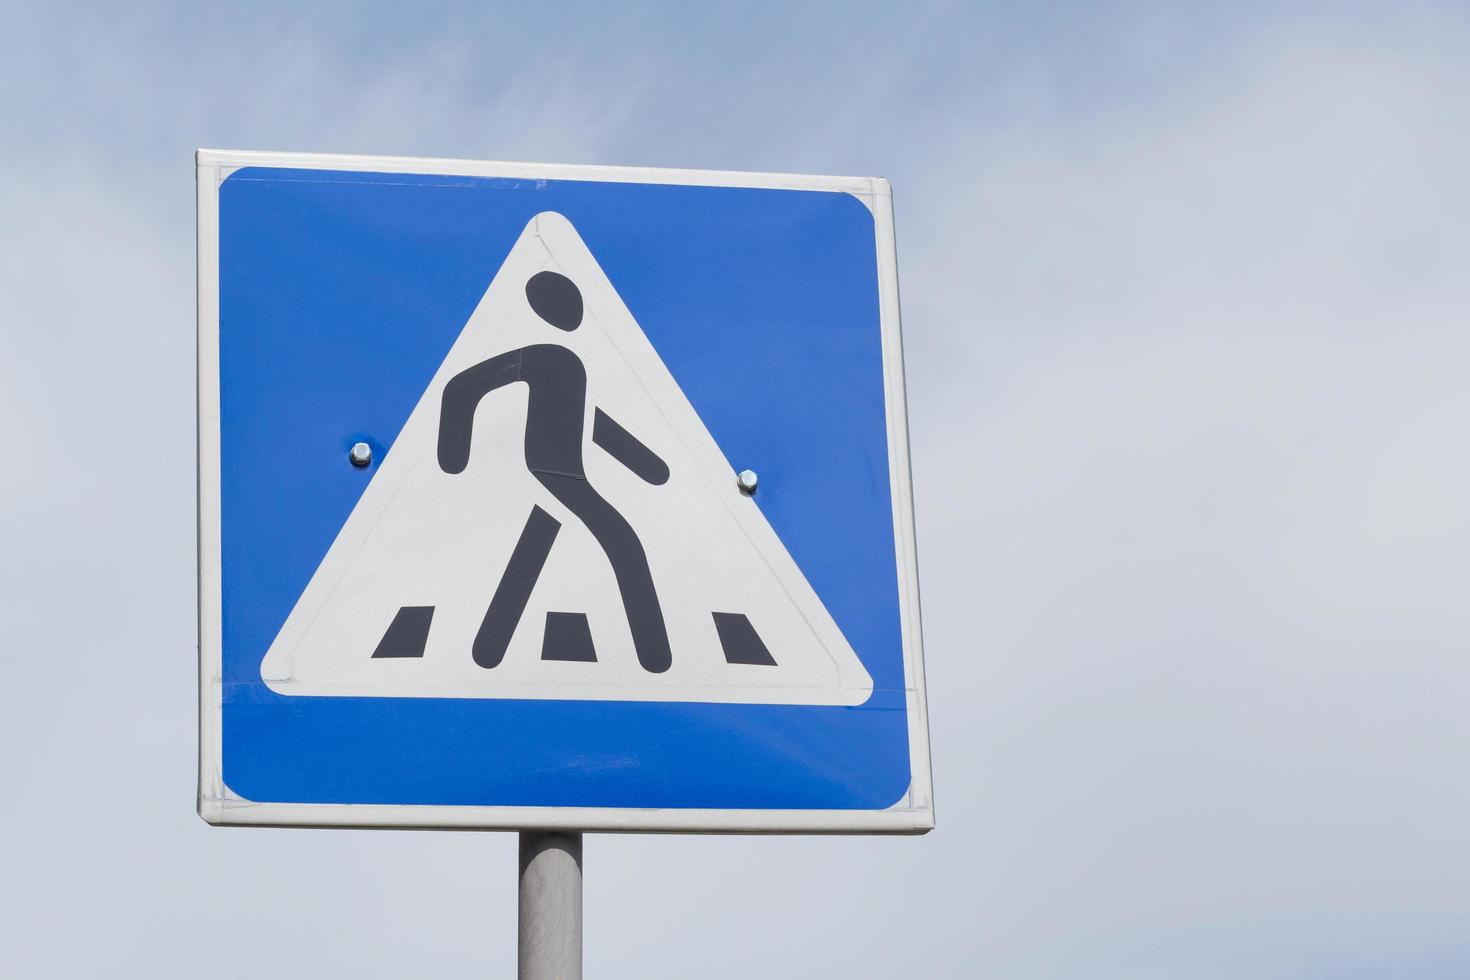 pedestrian crossing road sign against cloudy sky photo